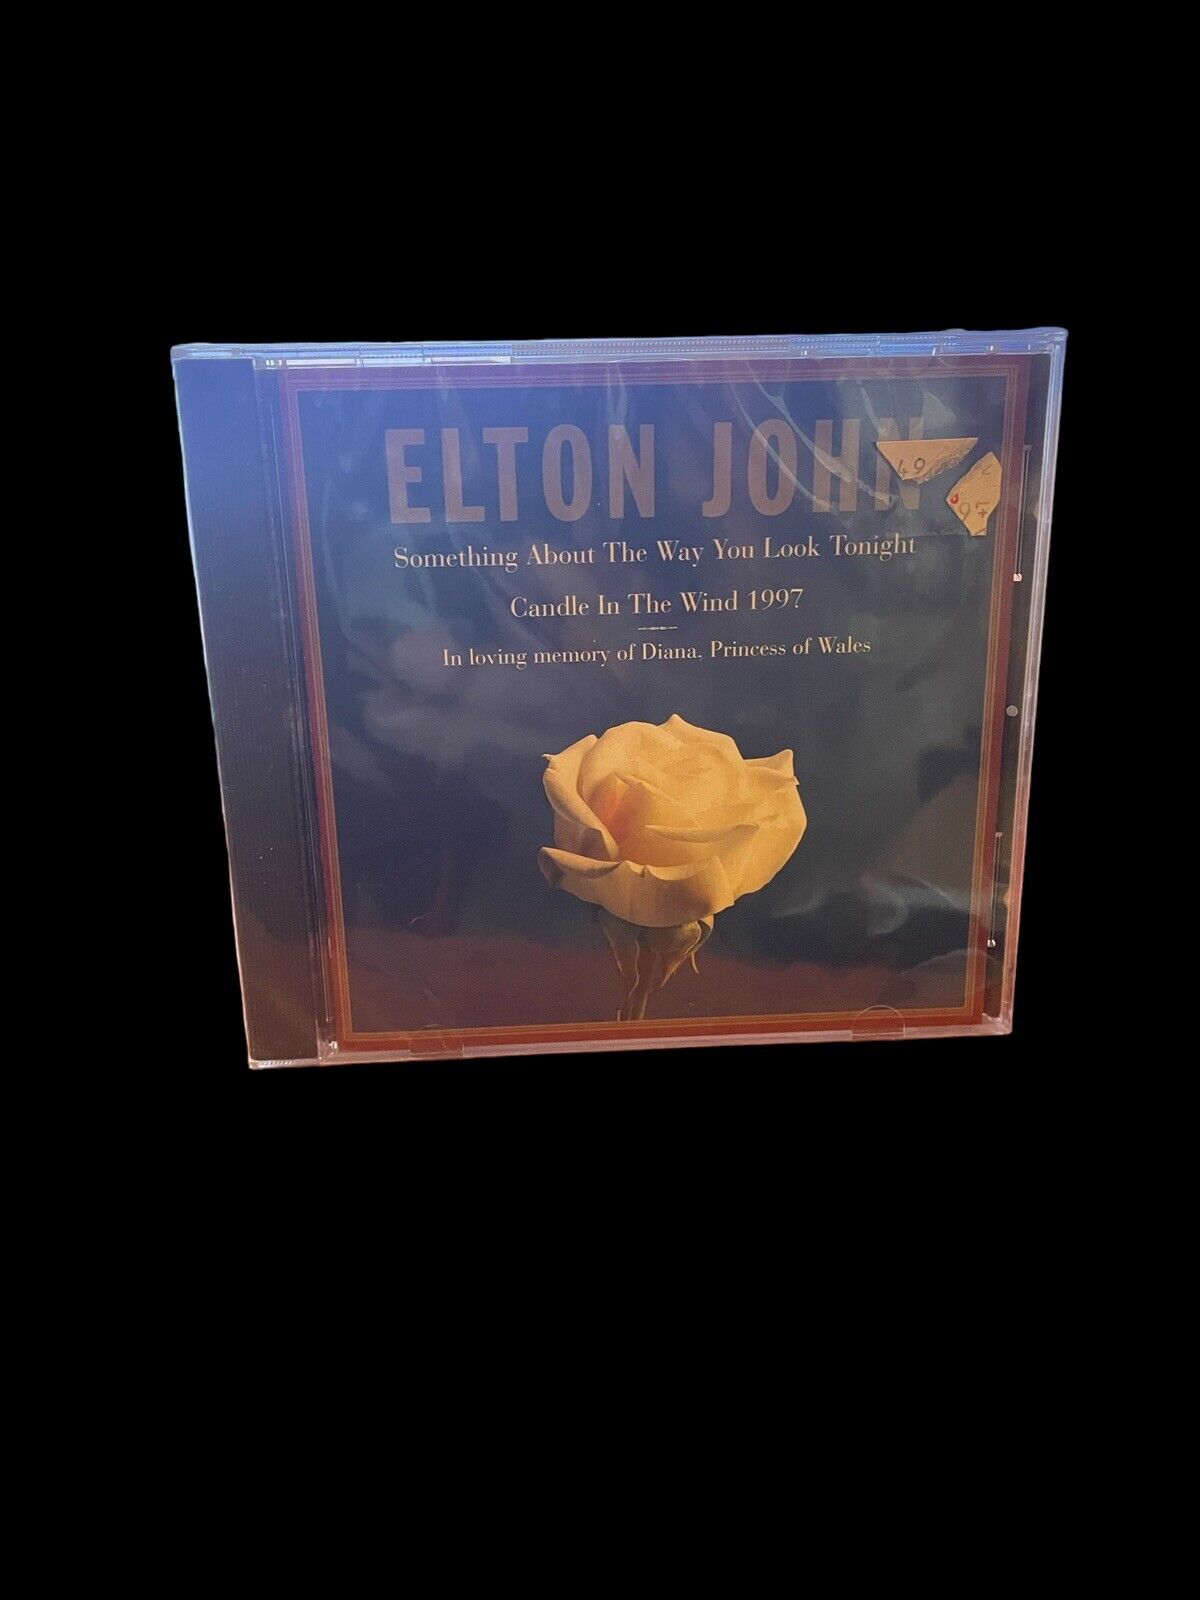 Elton John: Candle in the Wind 1997 Sealed CD In Memory of Princess Diana